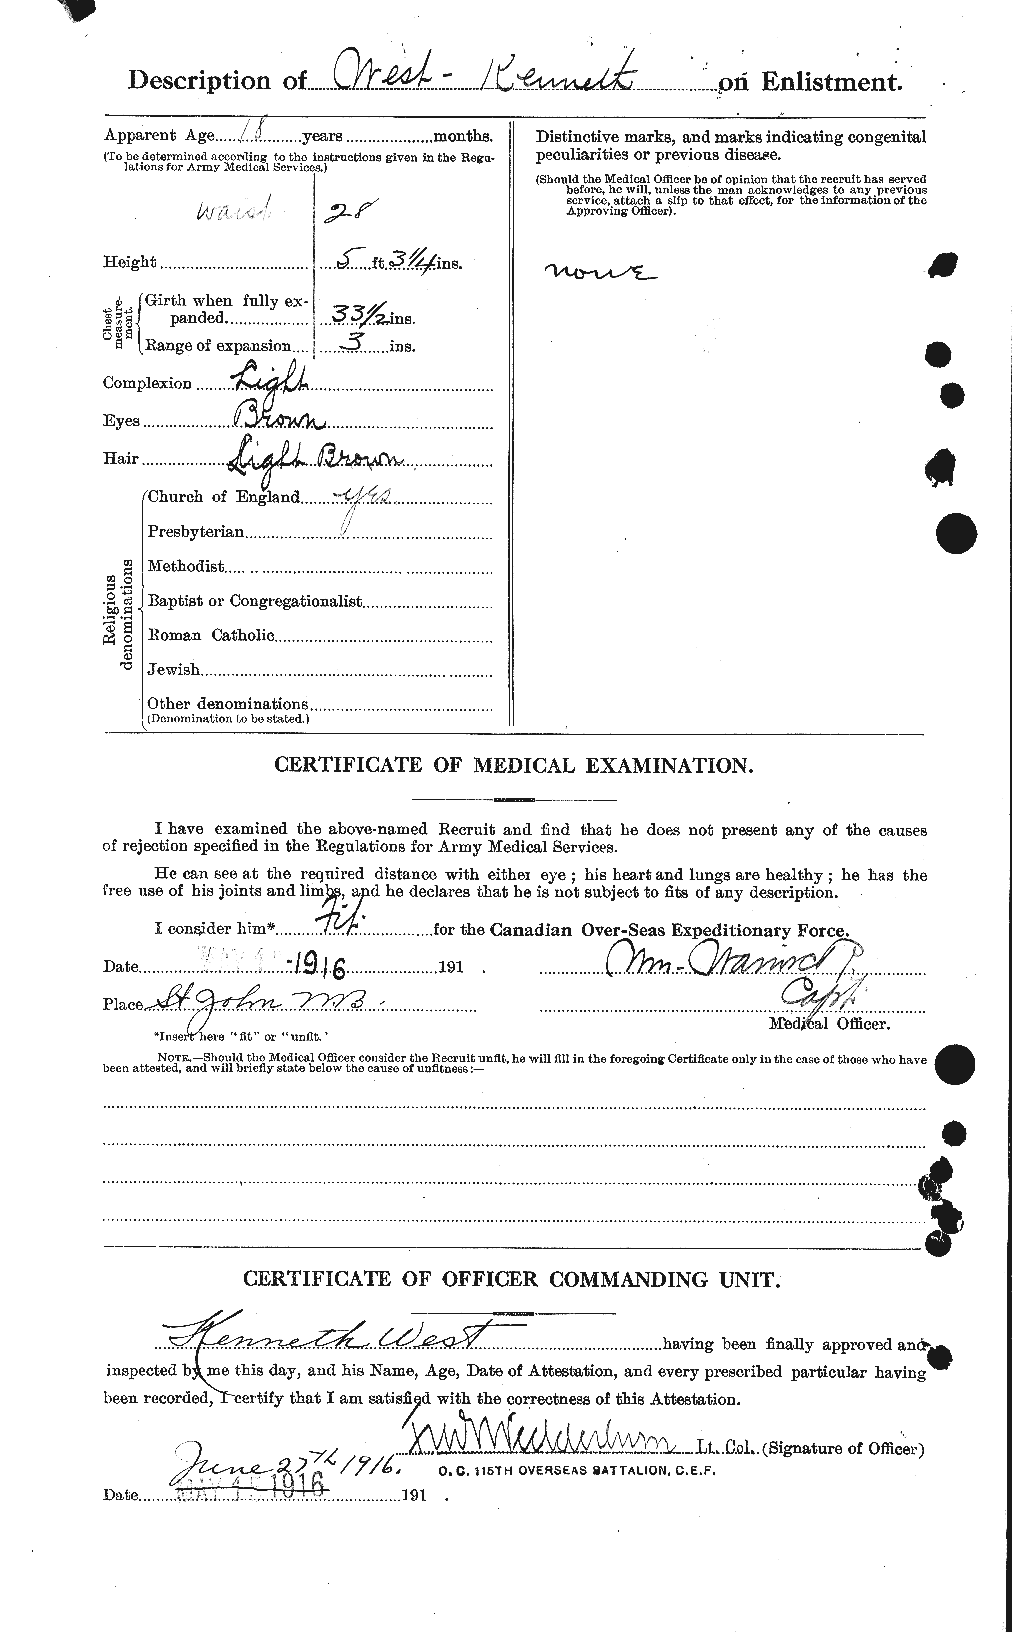 Personnel Records of the First World War - CEF 667855b